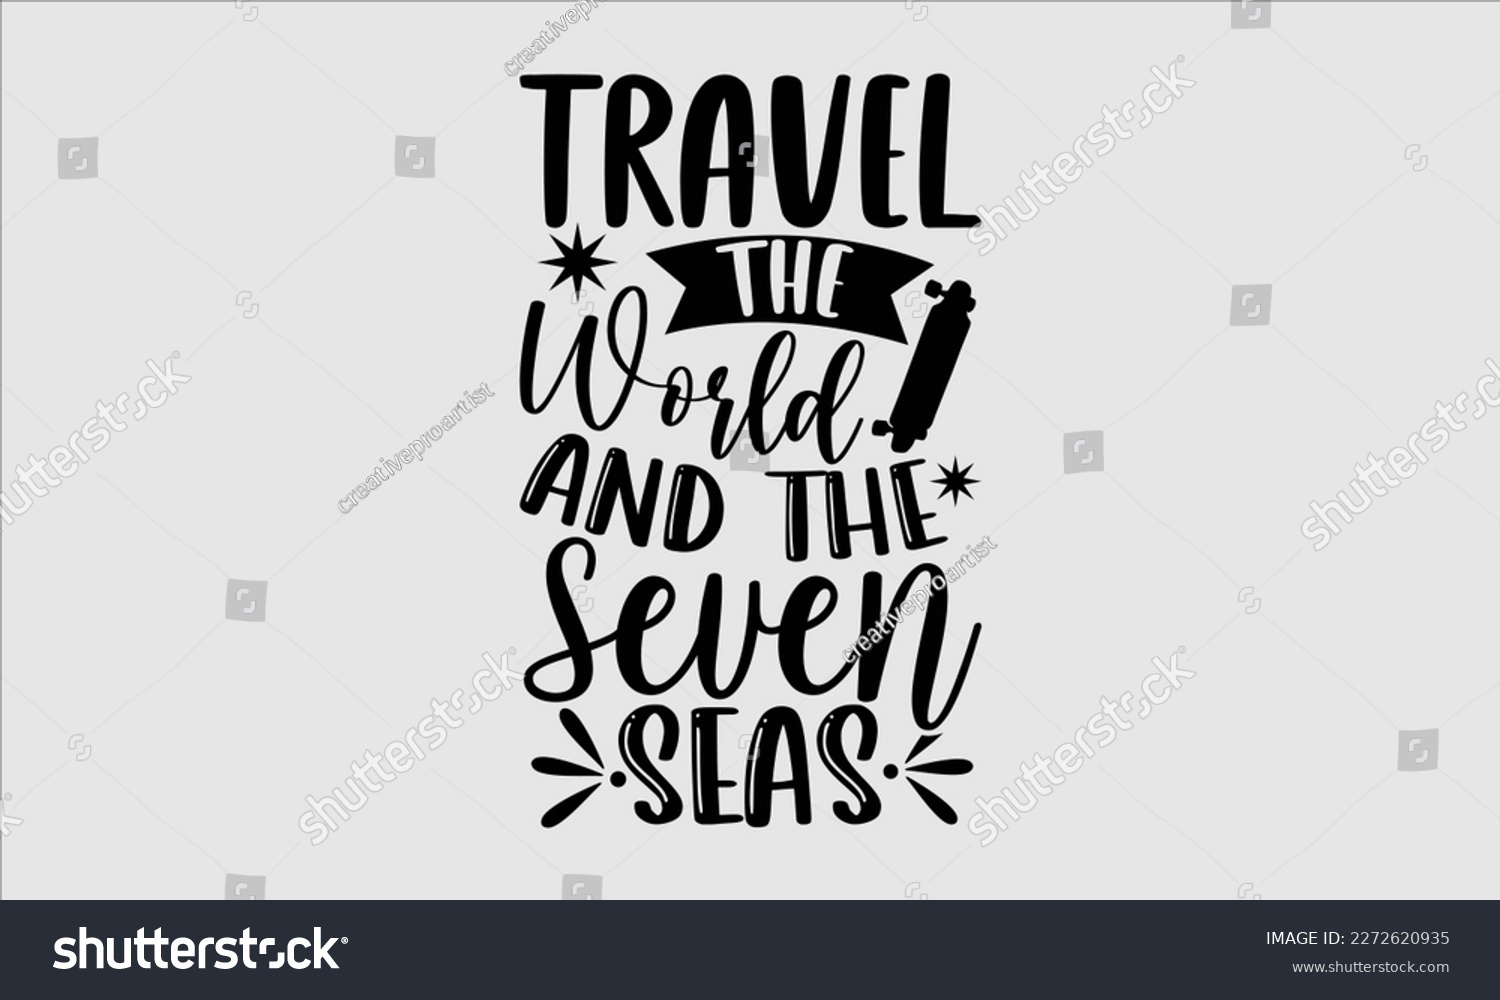 SVG of Travel the world and the seven seas- Longboarding T- shirt Design, Hand drawn lettering phrase, Illustration for prints on t-shirts and bags, posters, funny eps files, svg cricut svg